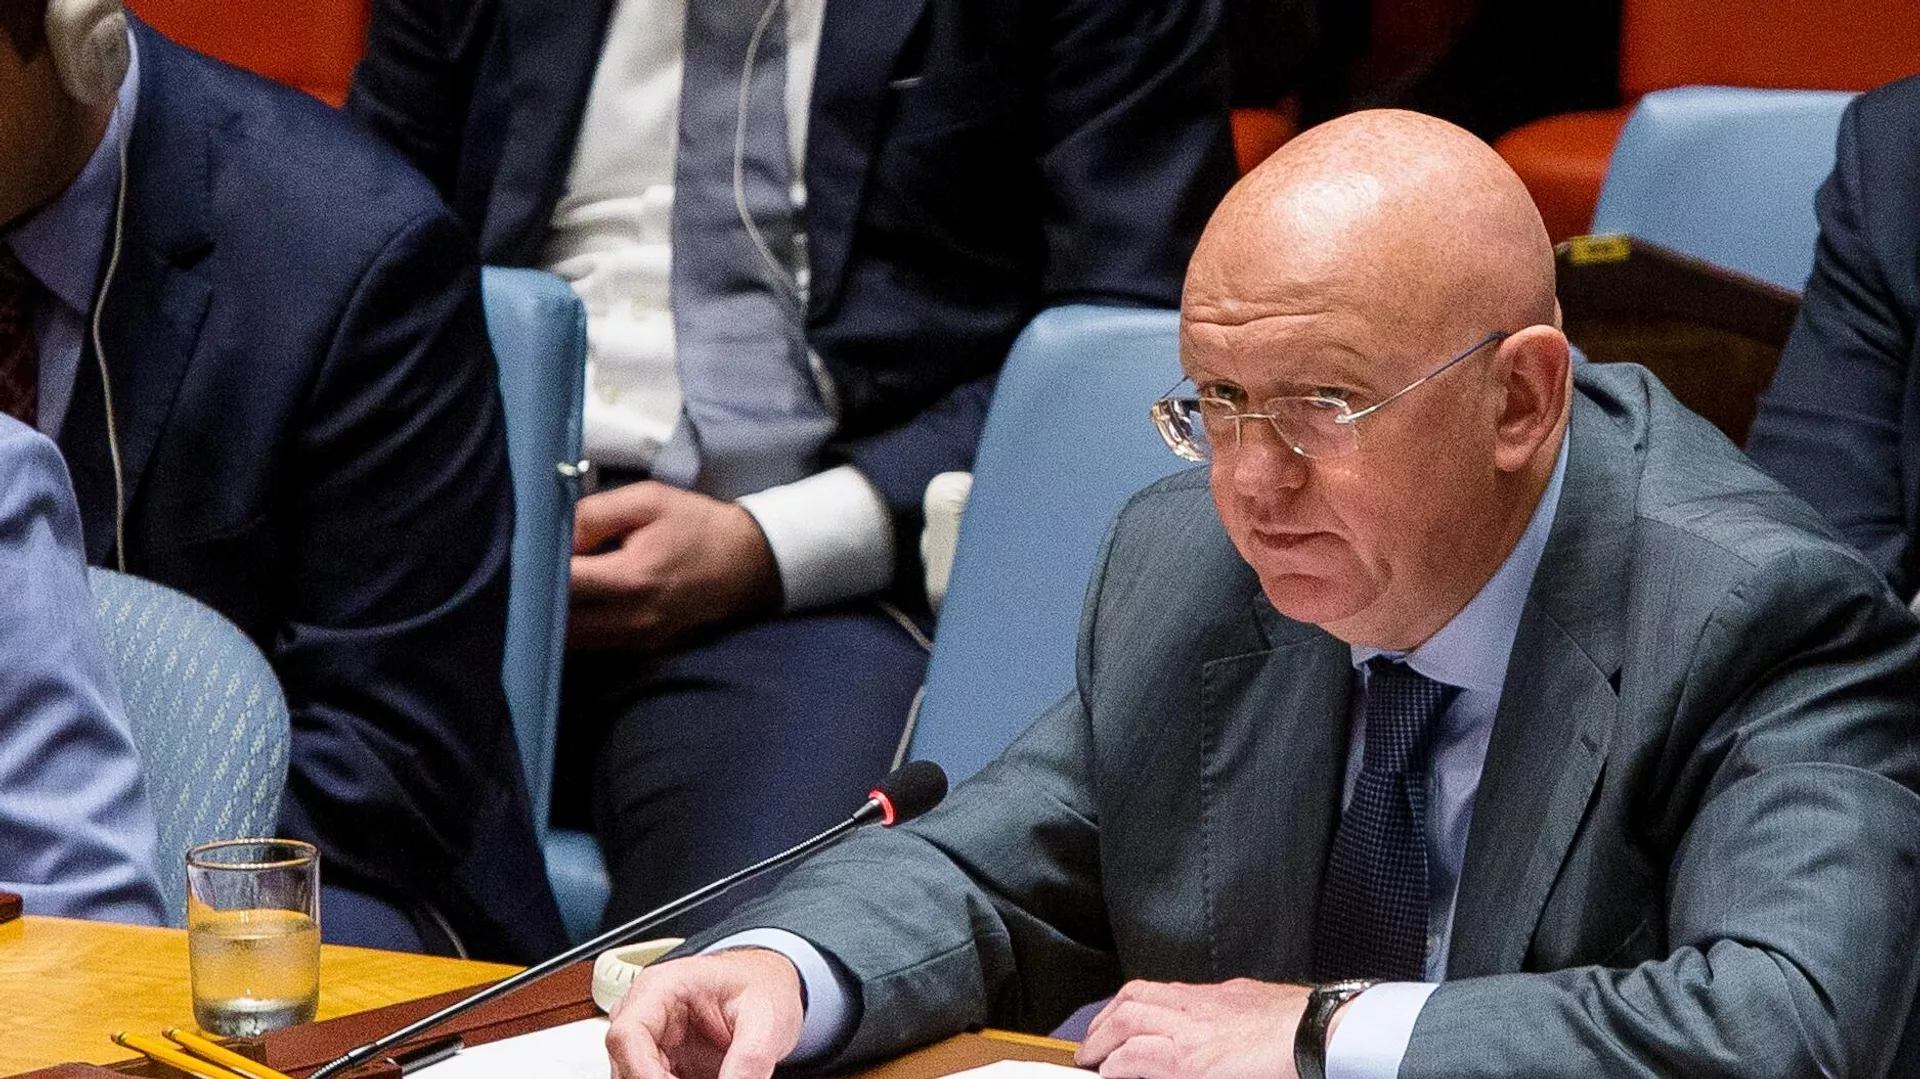 Russia Slams UNSC for Ignoring Attack on Iranian Consulate, Calls for End to Bloodshed